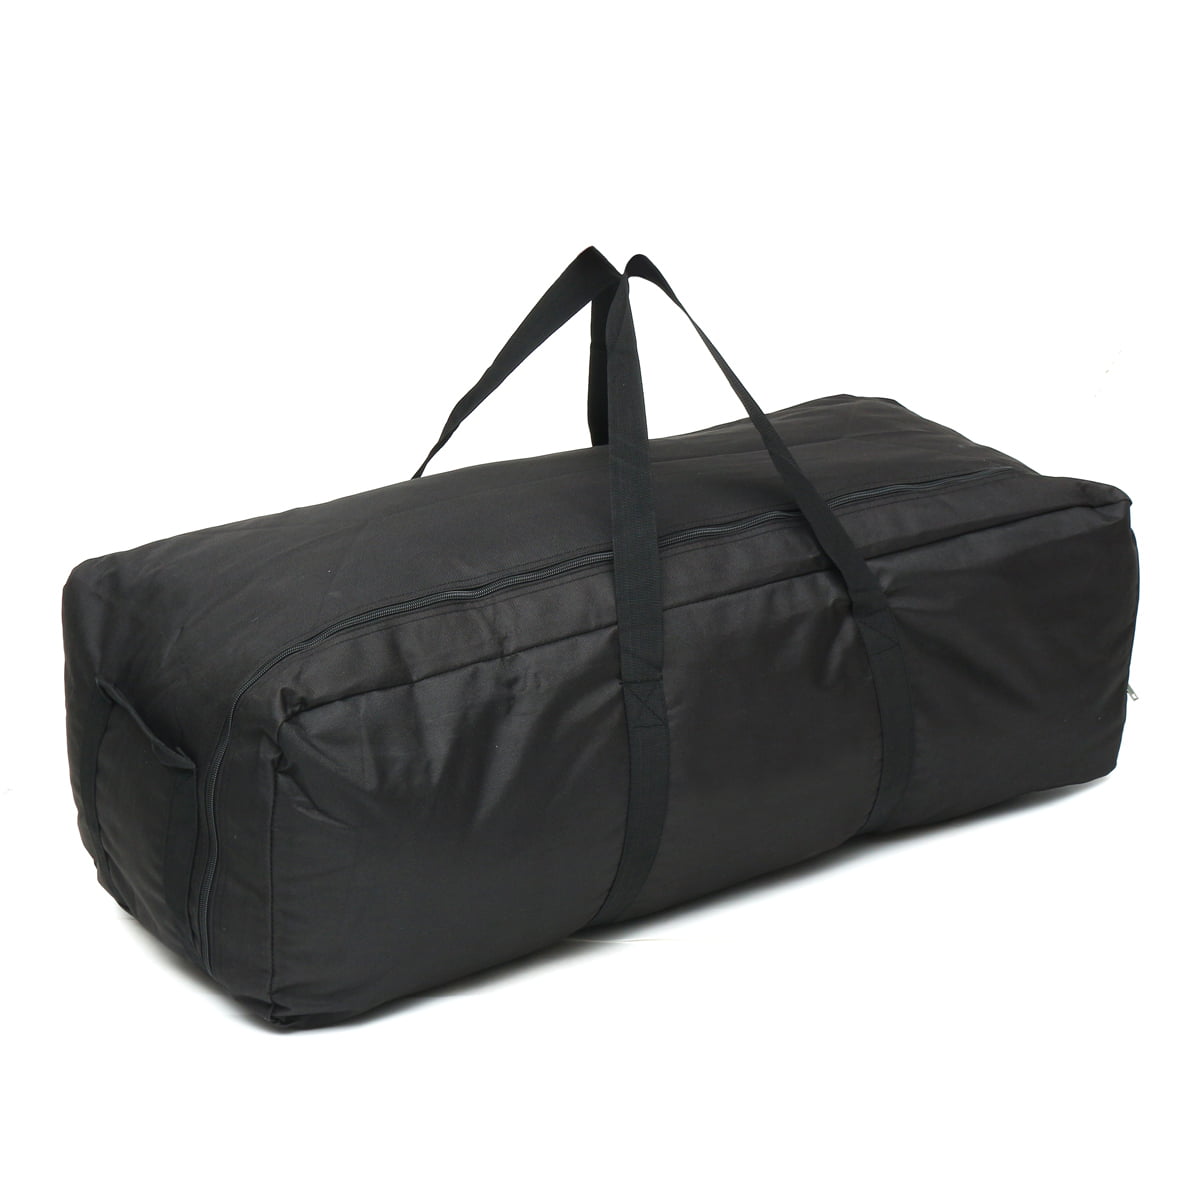 Details about   Luggage Baggage Storage Carry-On Duffle Bags Portable Waterproof Foldable Travel 